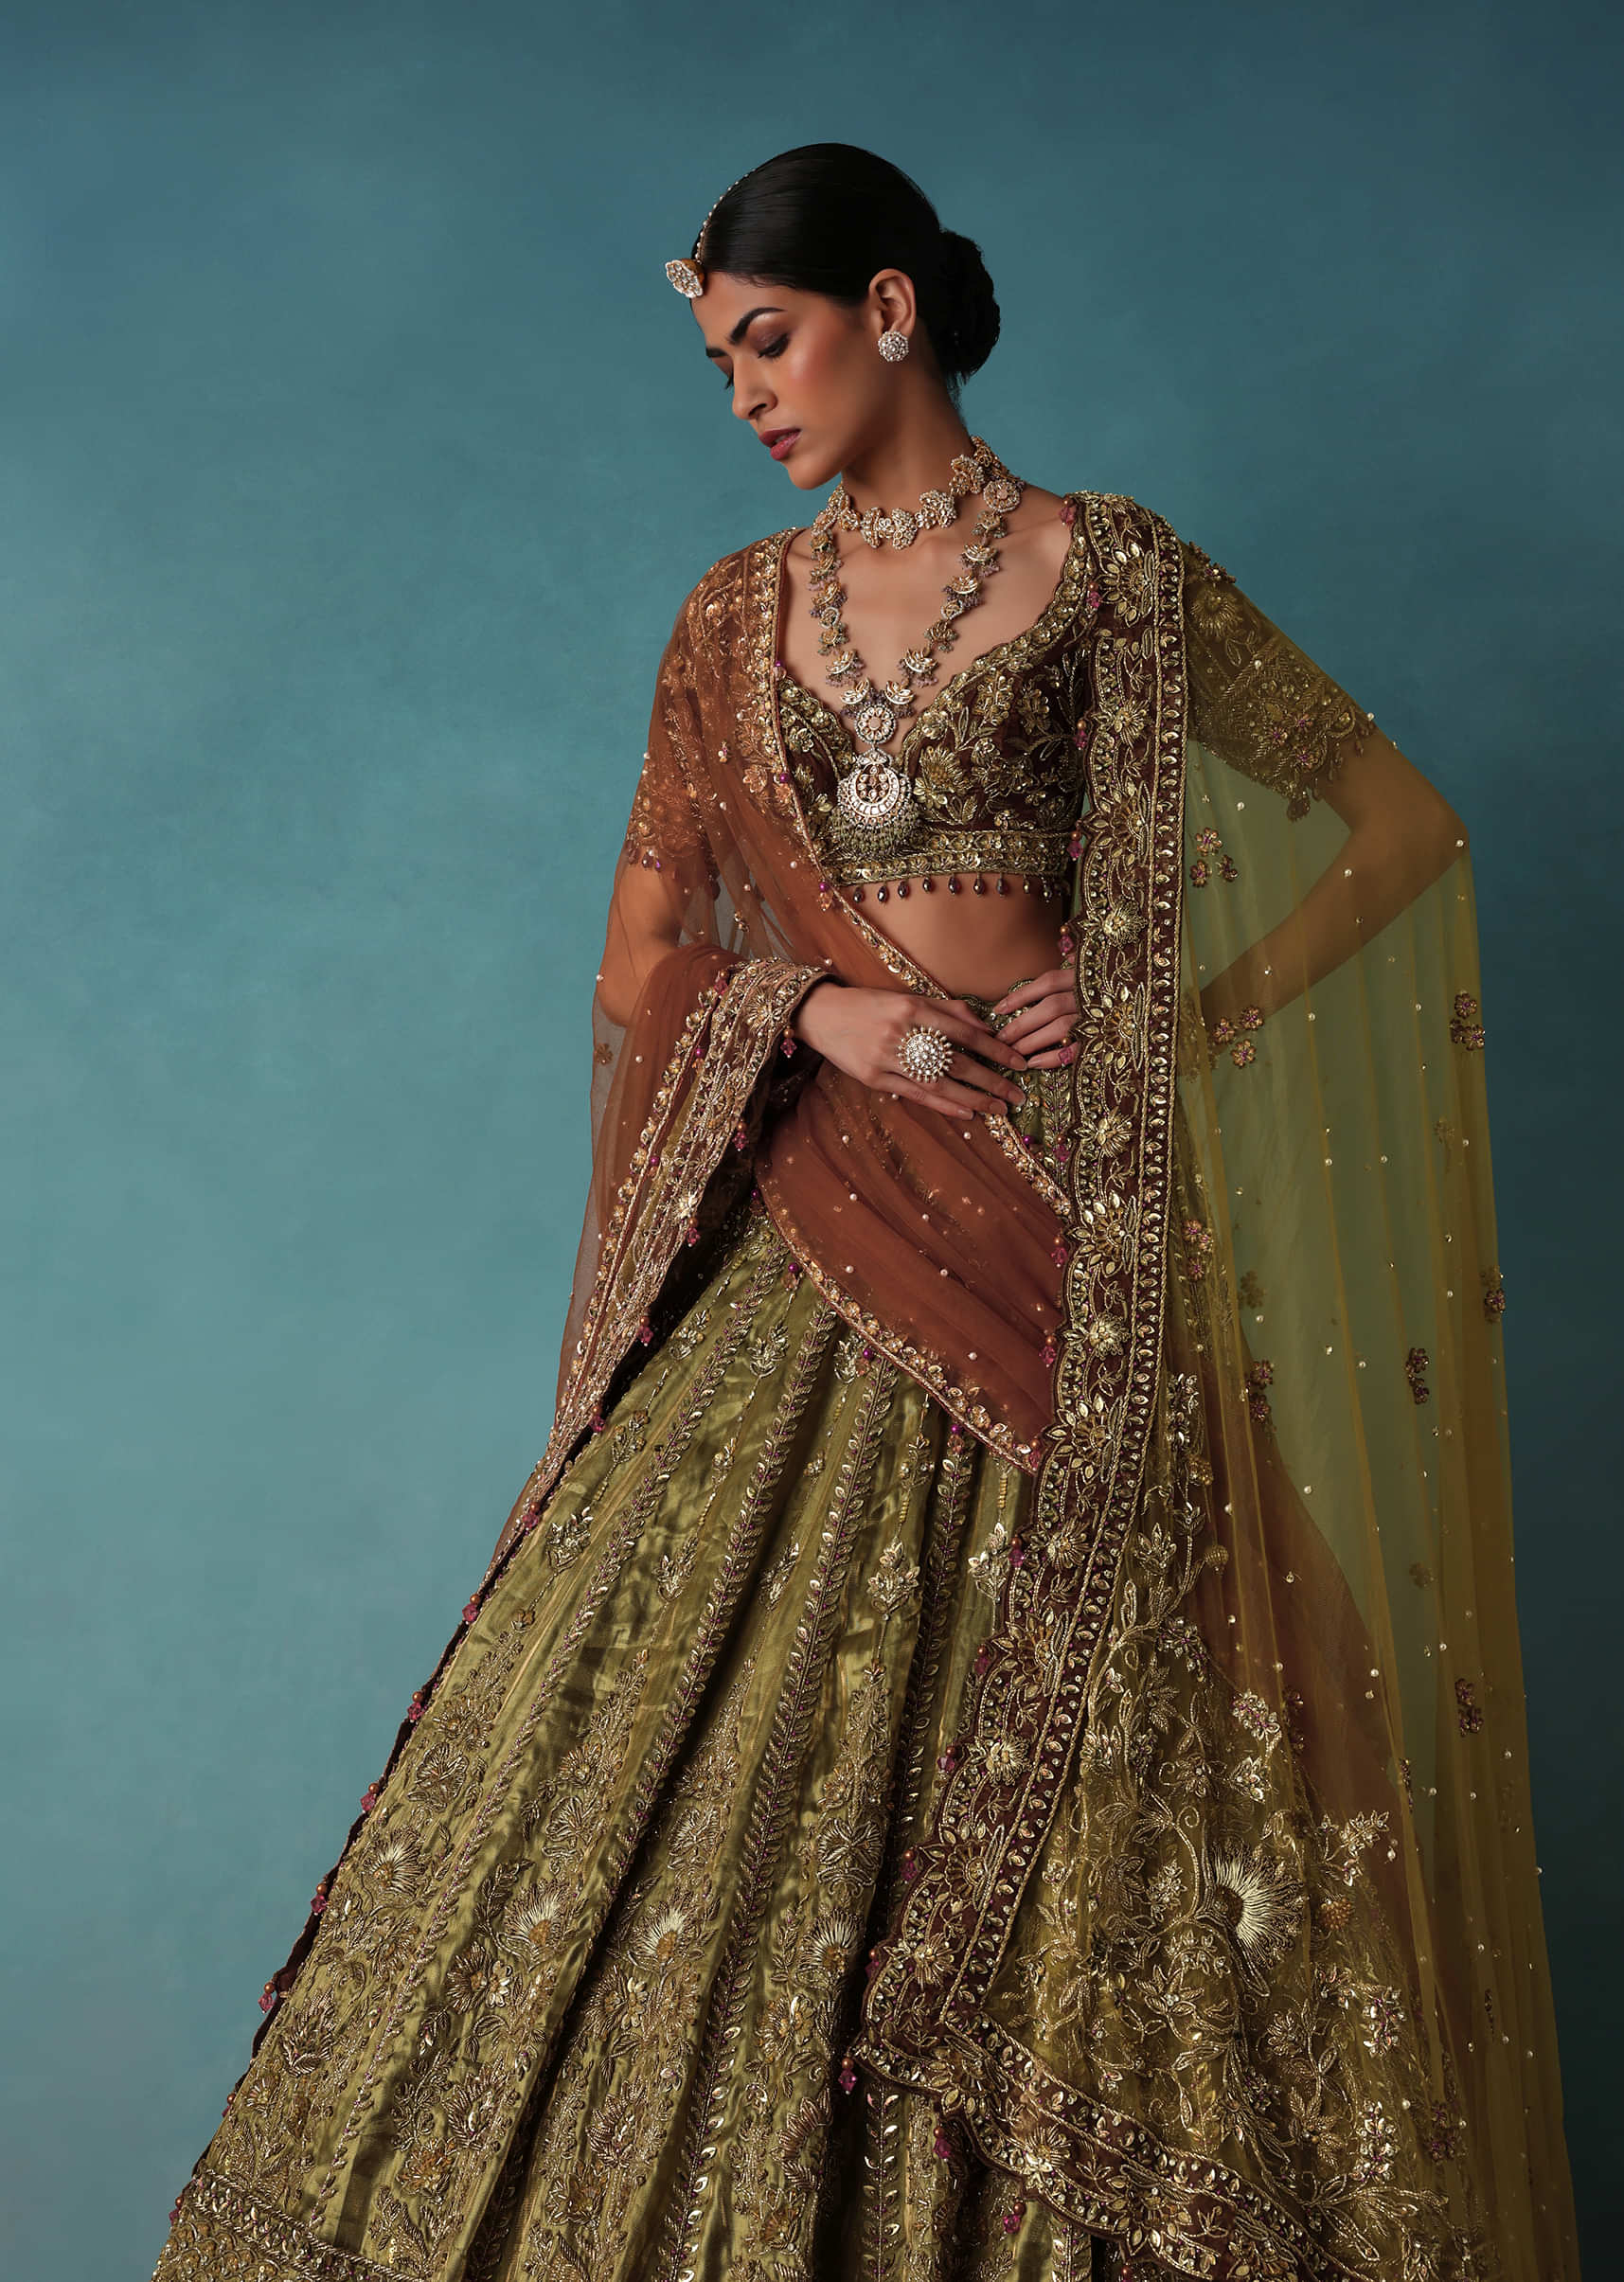 Olive Gold Bridal Lehenga Set Adorned With Sequins And Pearls